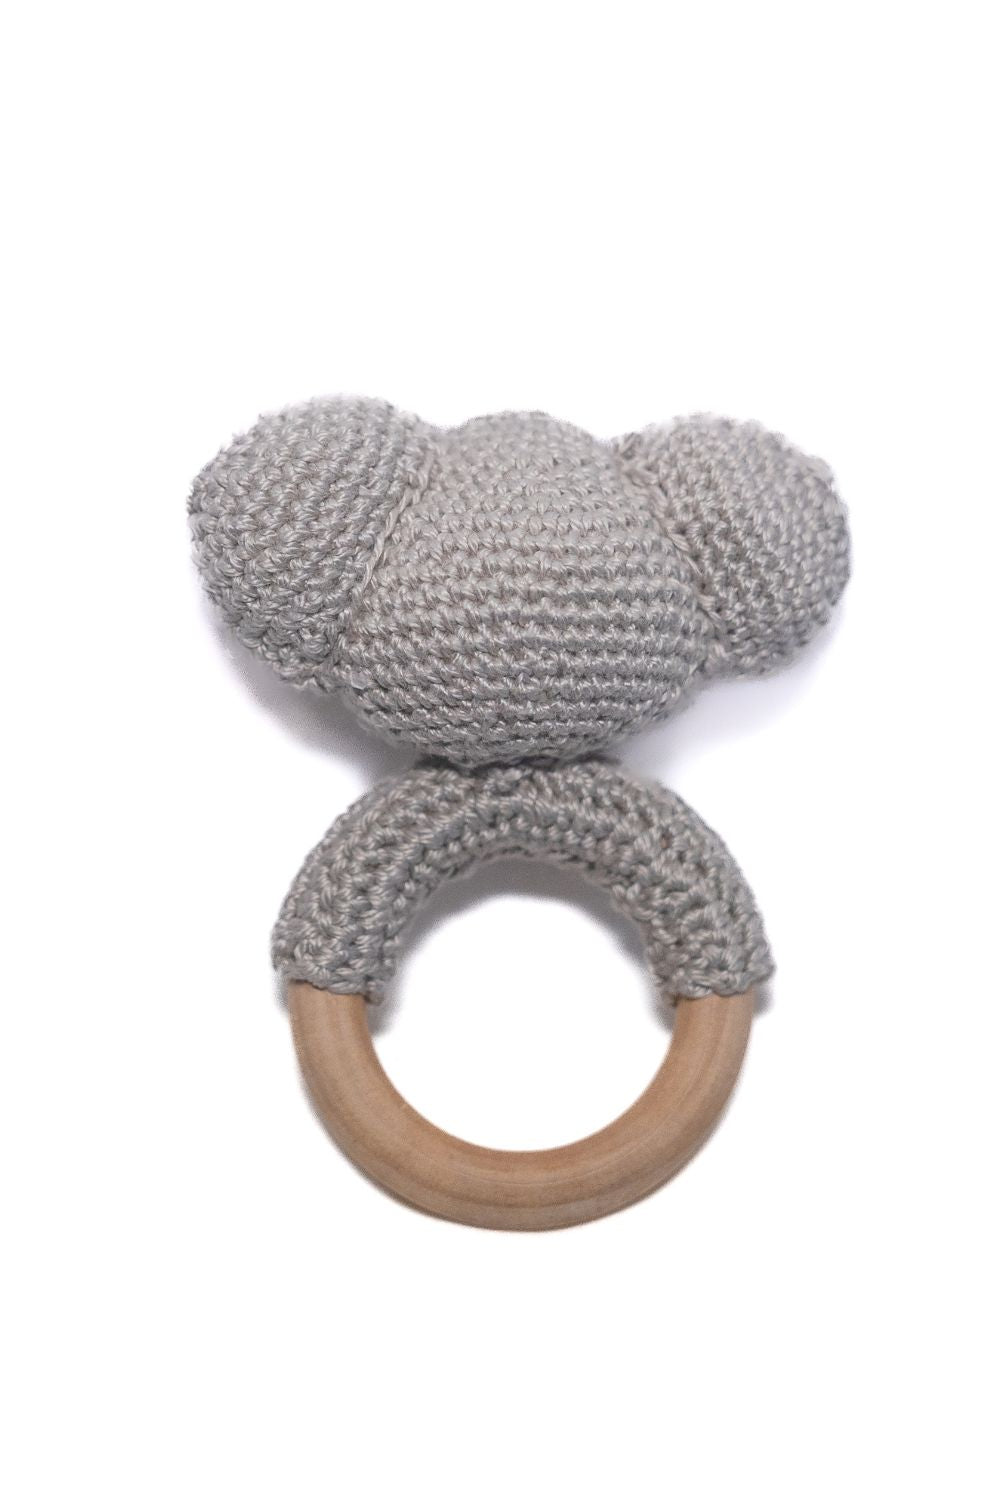 Cotton Crochet Baby Toys made by women artisans